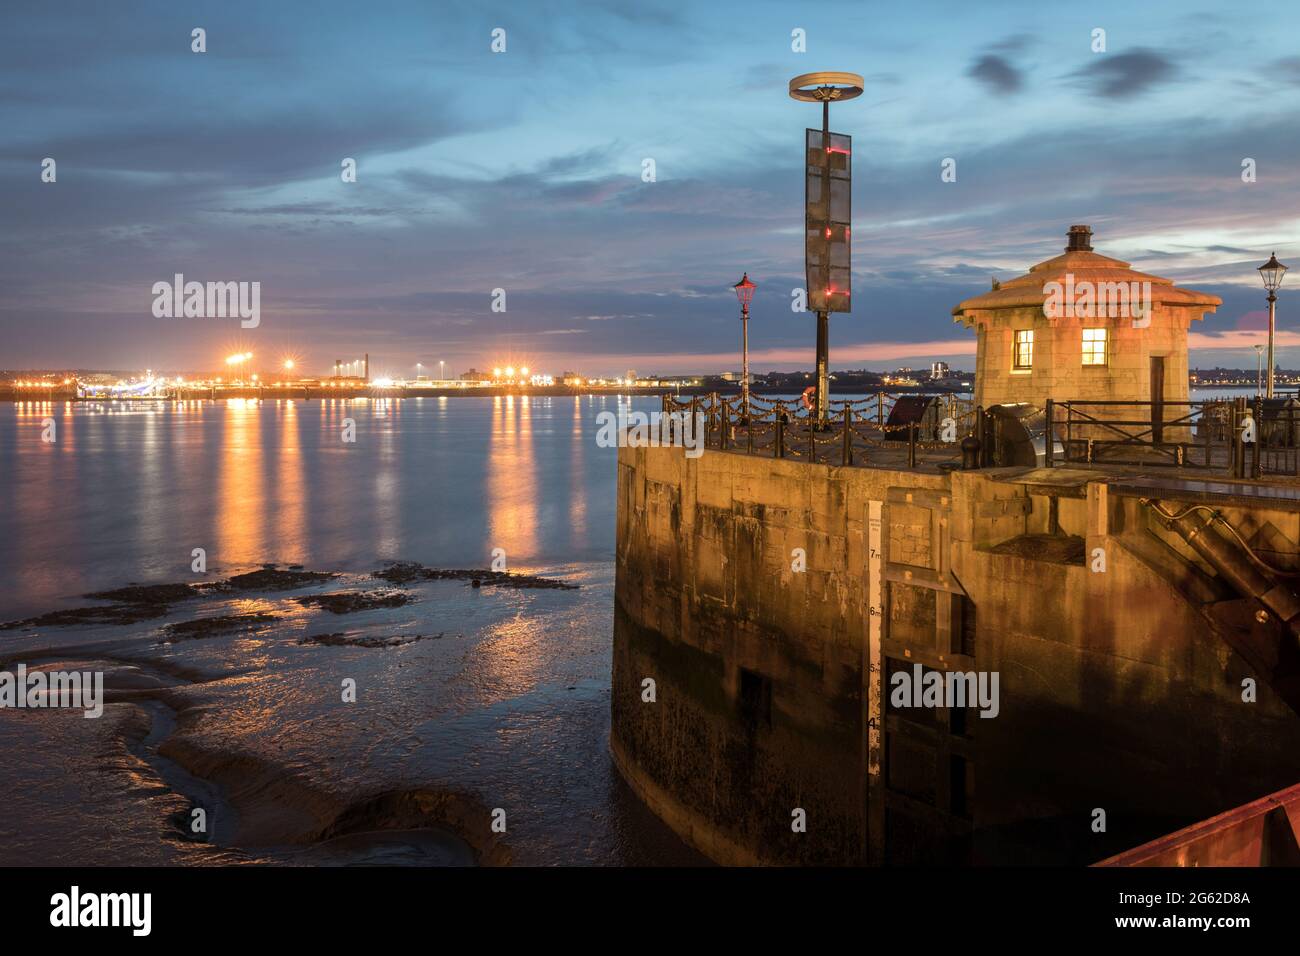 A view across the River Mersey from Canning Dock at Pier Head Stock Photo